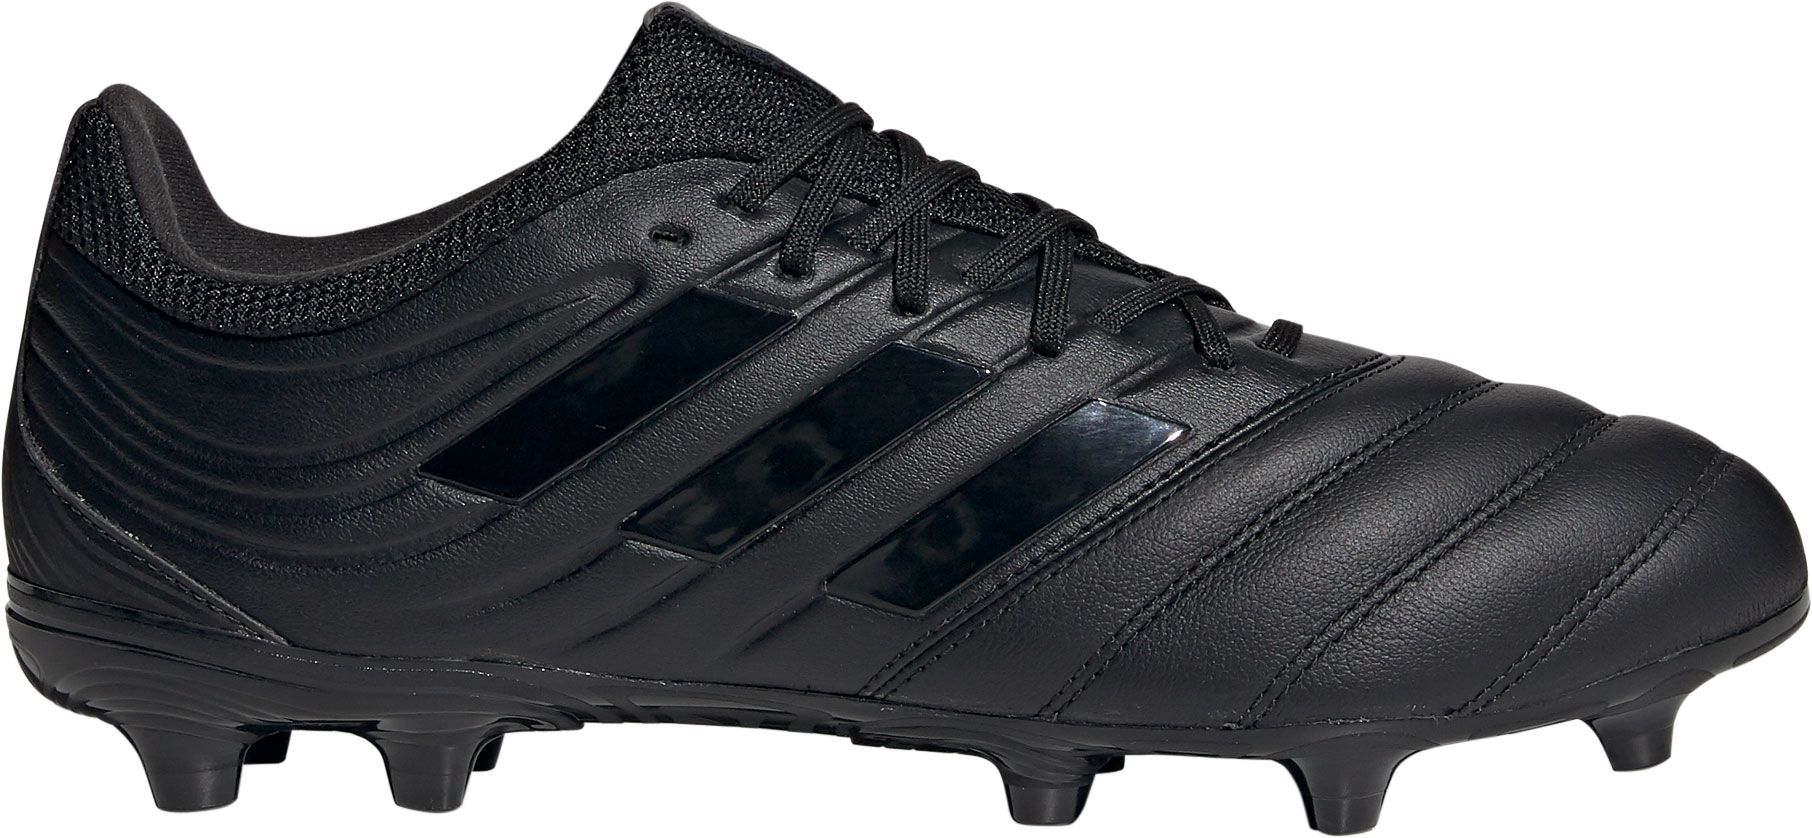 shoes adidas soccer